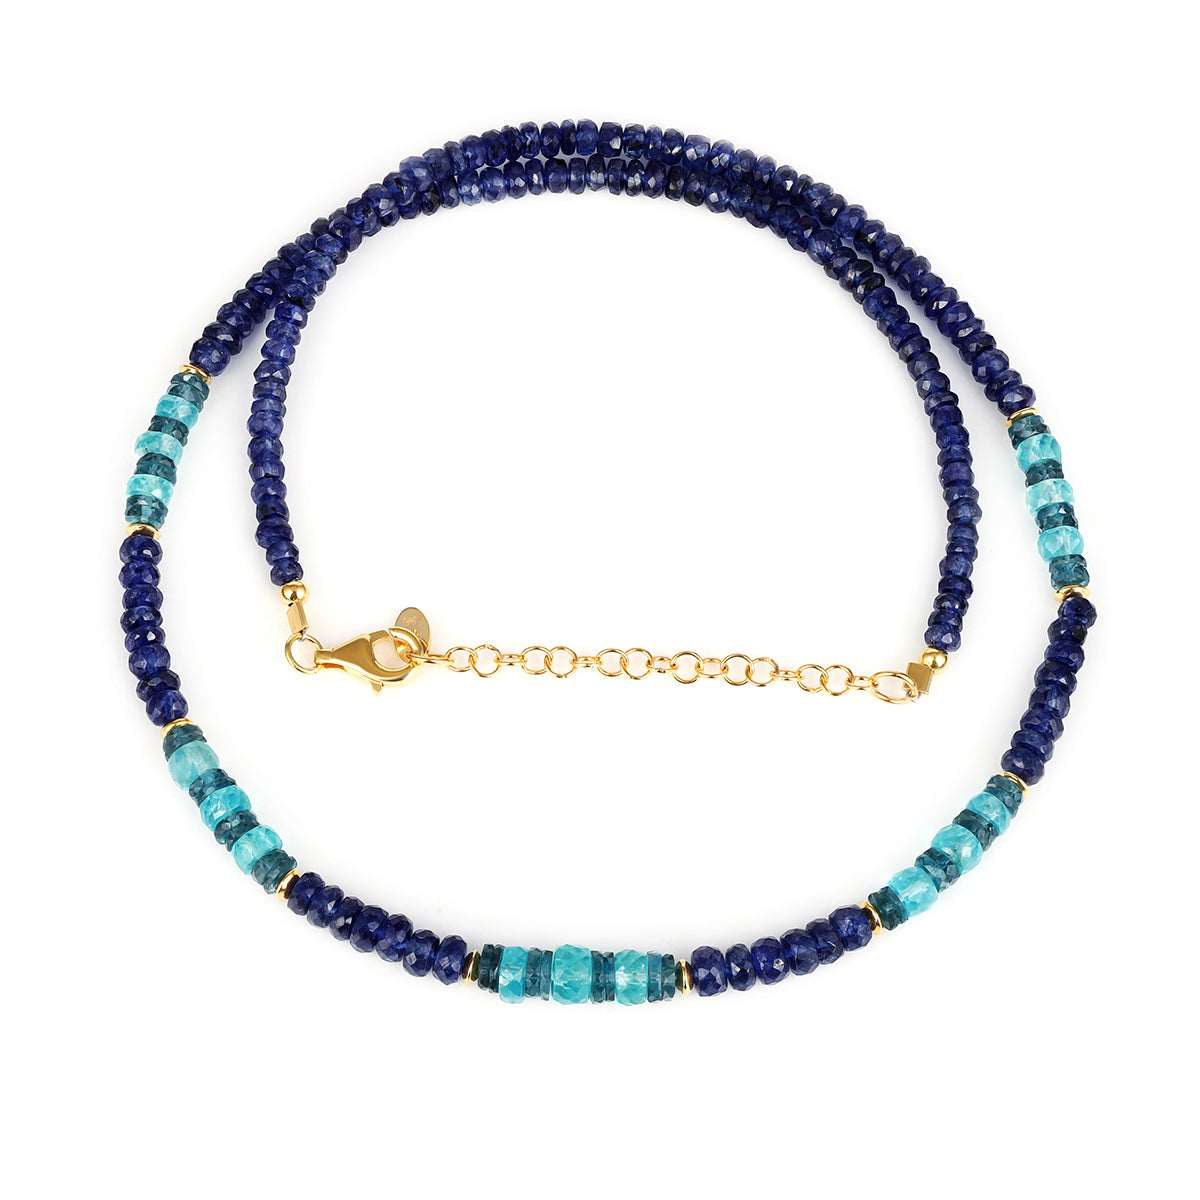 Blue Sapphire, Topaz and Apatite Silver Necklace